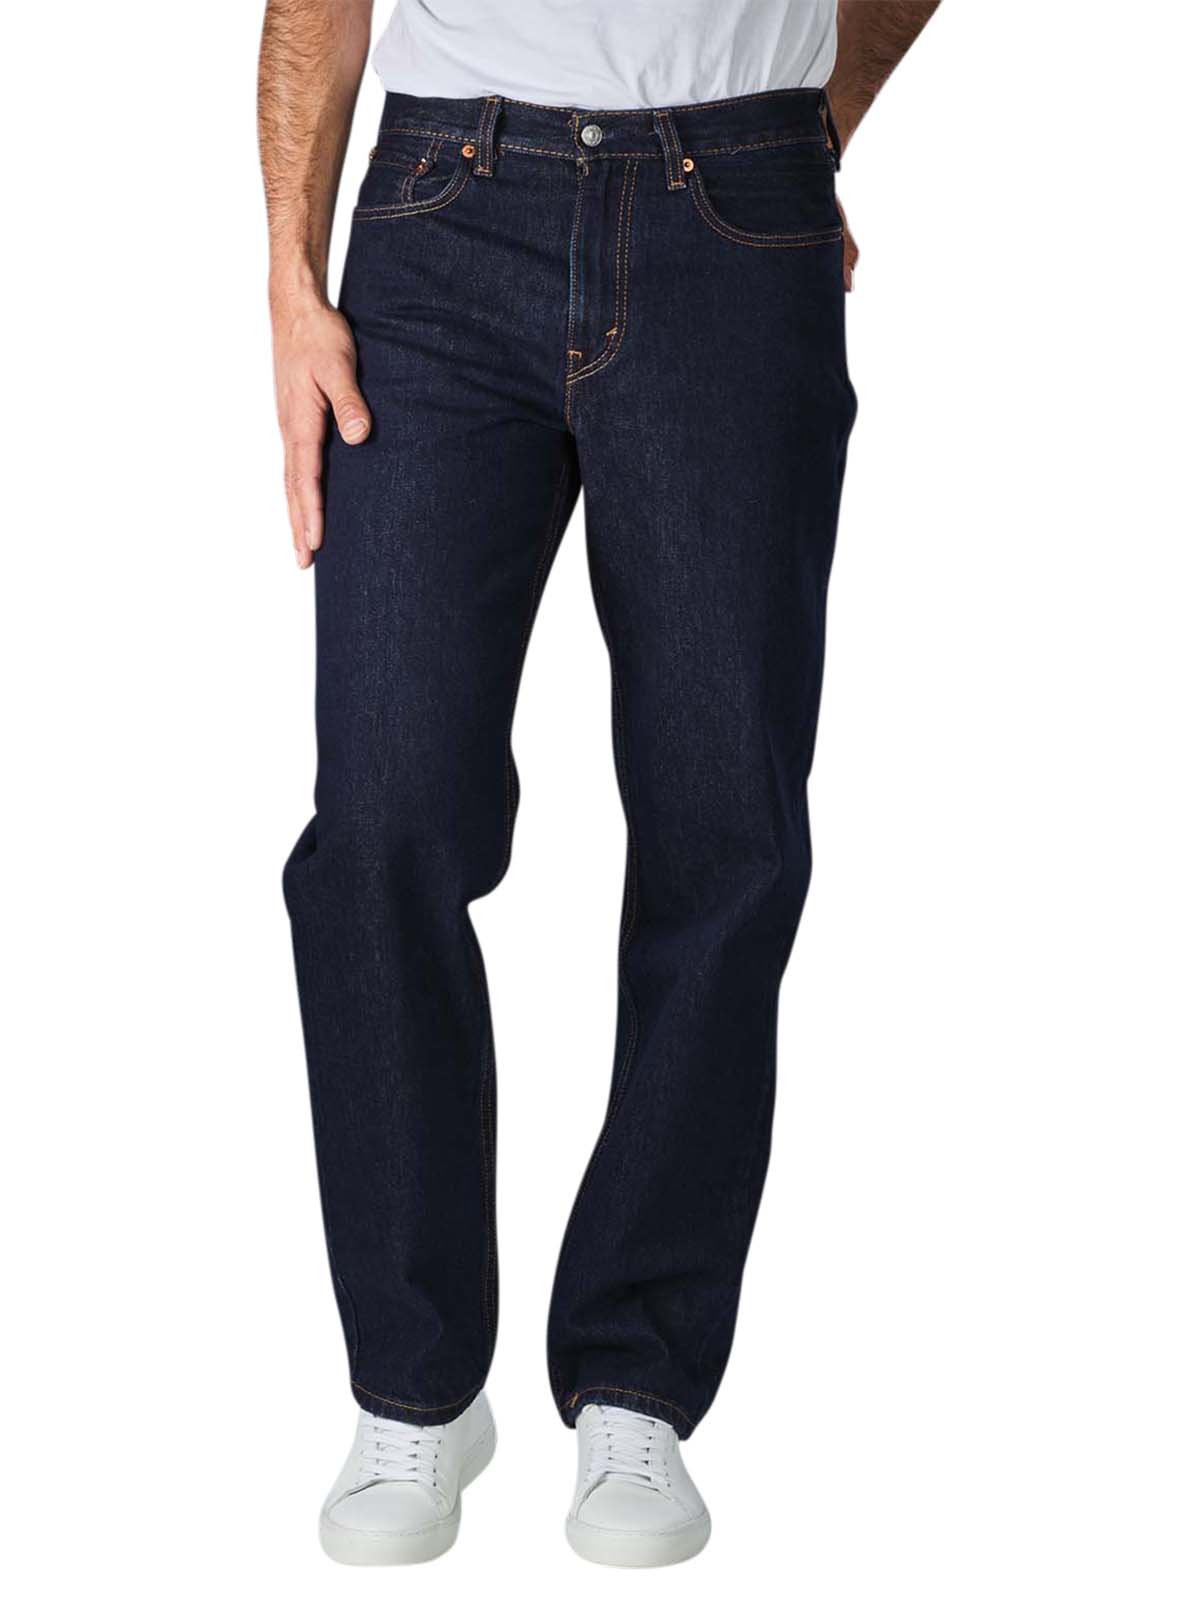 Levi's 550 Jeans Relaxed Fit rinse Levi's Men's Jeans | Free Shipping on   - SIMPLY LOOK GOOD